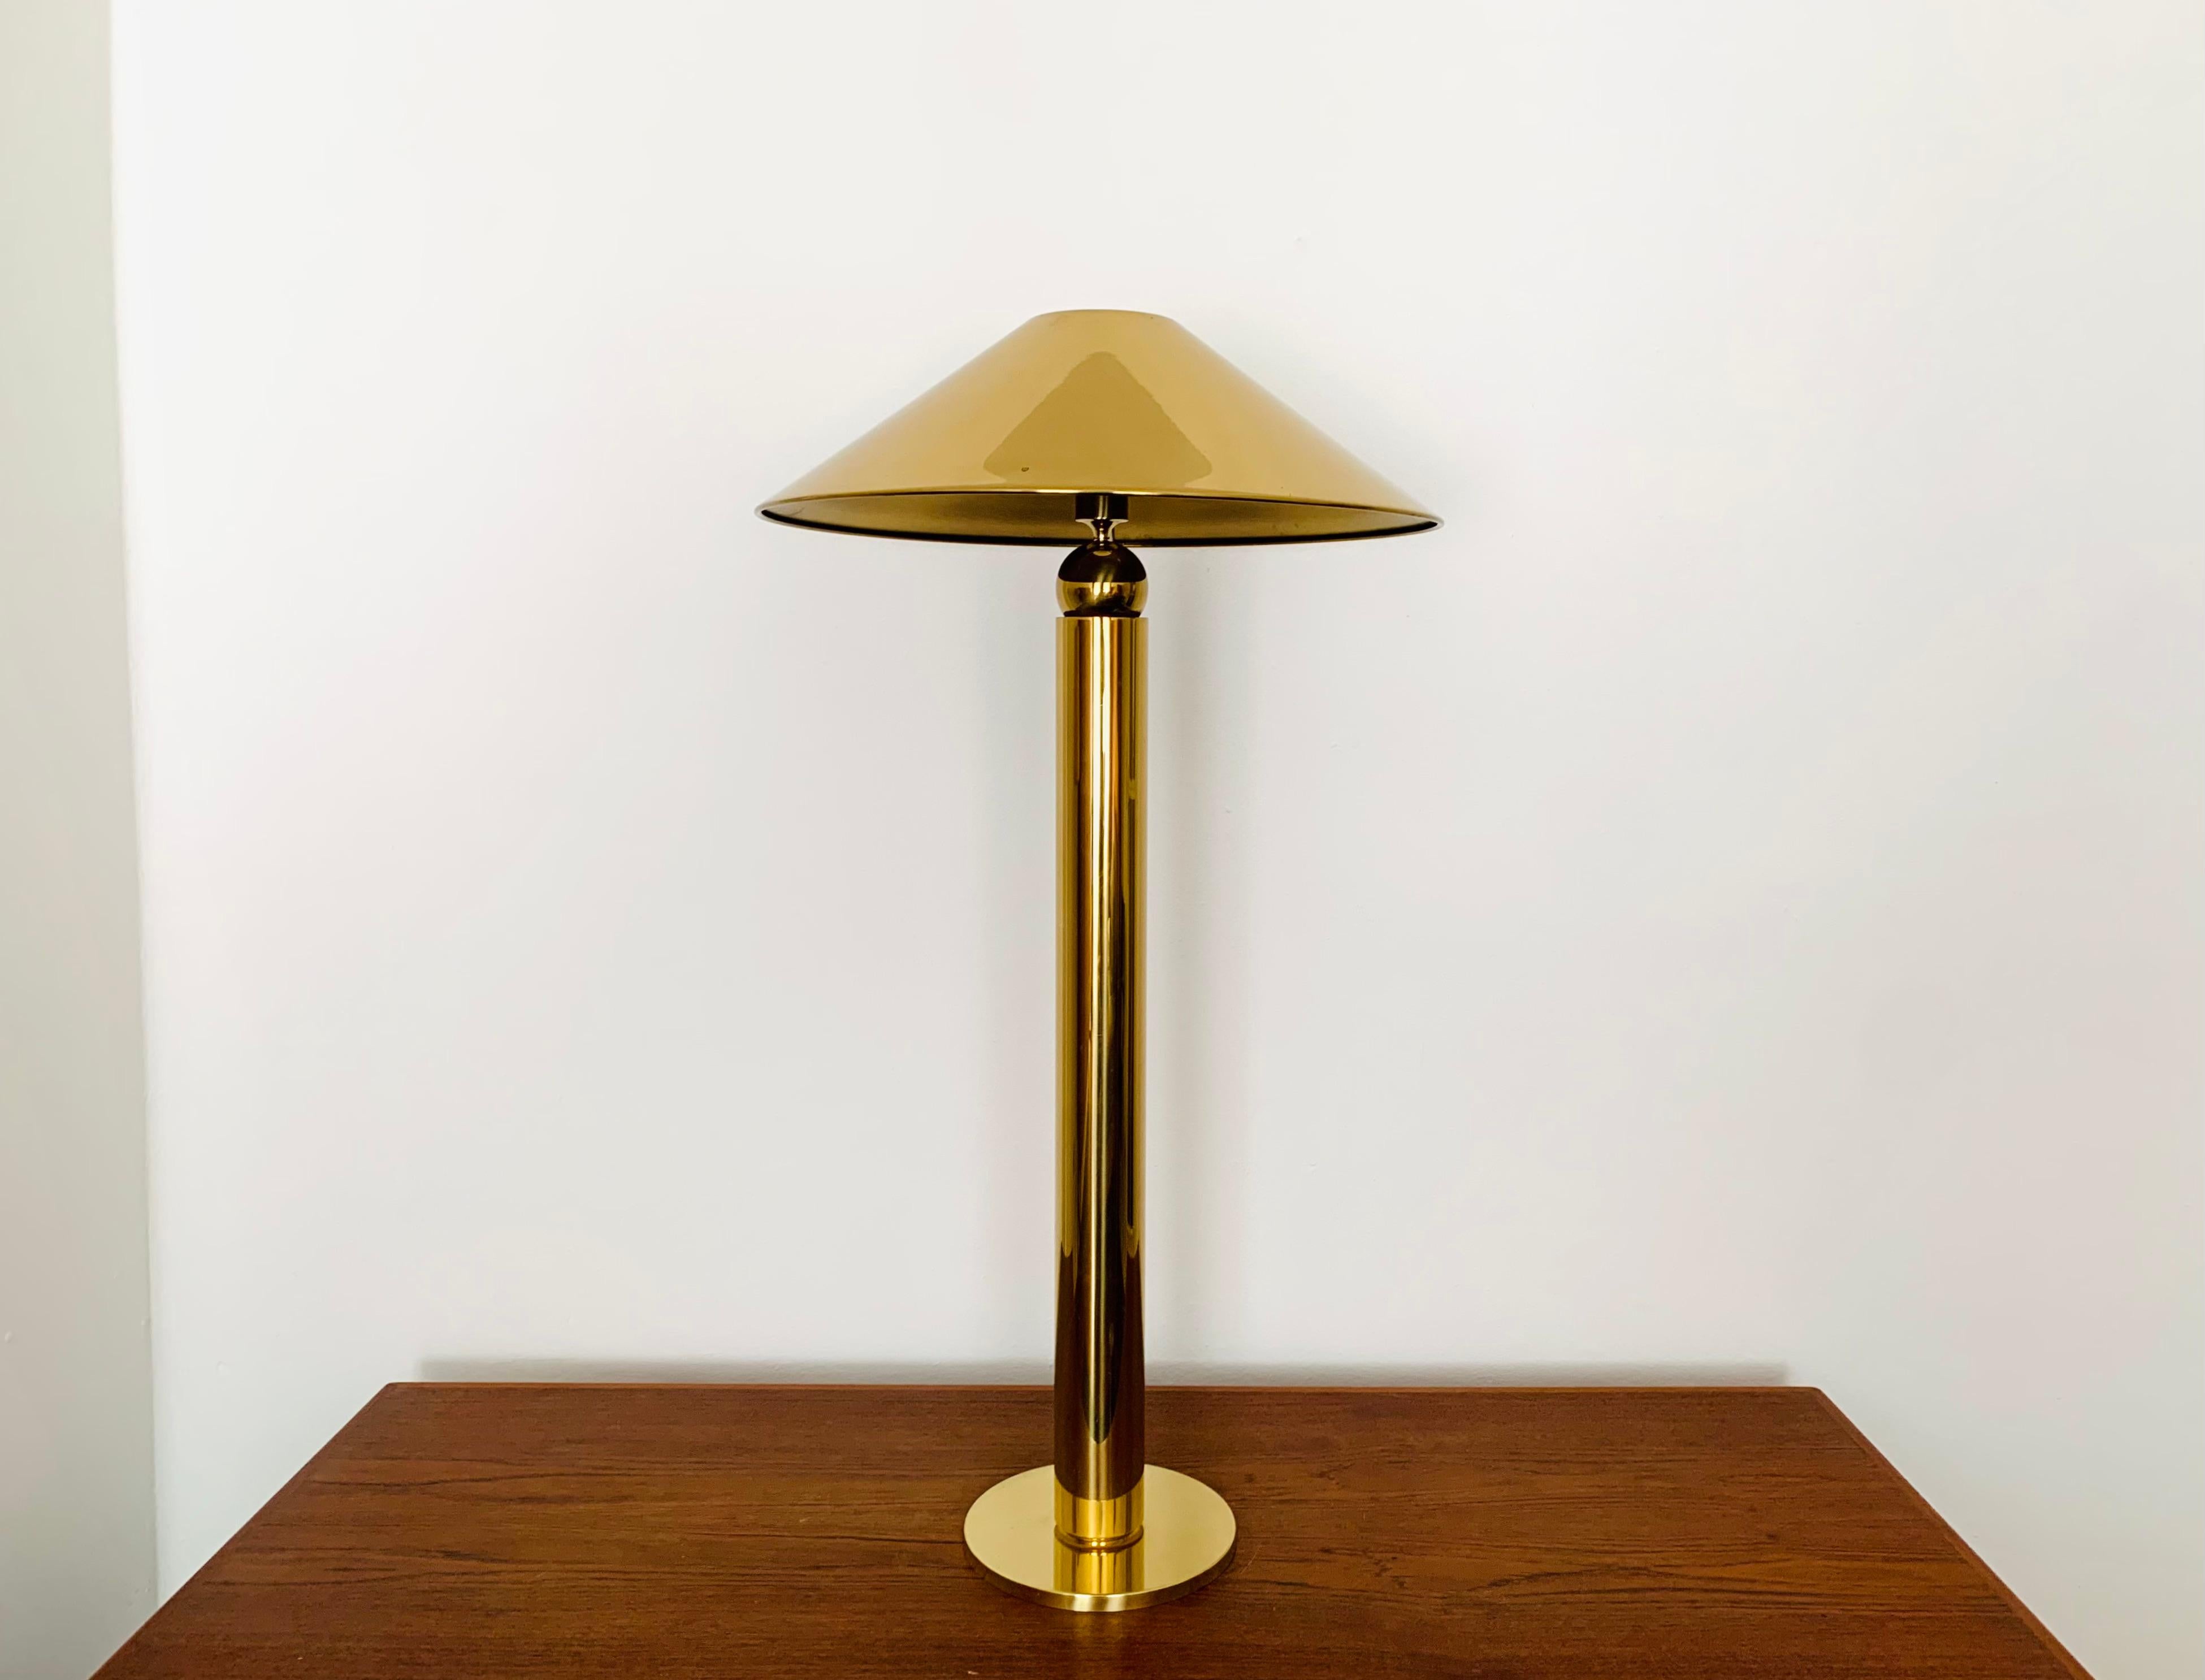 Very beautiful and rare brass floor lamp from the 1970s.
The lighting effect of the lamp is extremely beautiful.
The design and the very beautiful details create a very noble and pleasant light.
The lamp creates a very cozy atmosphere and is of